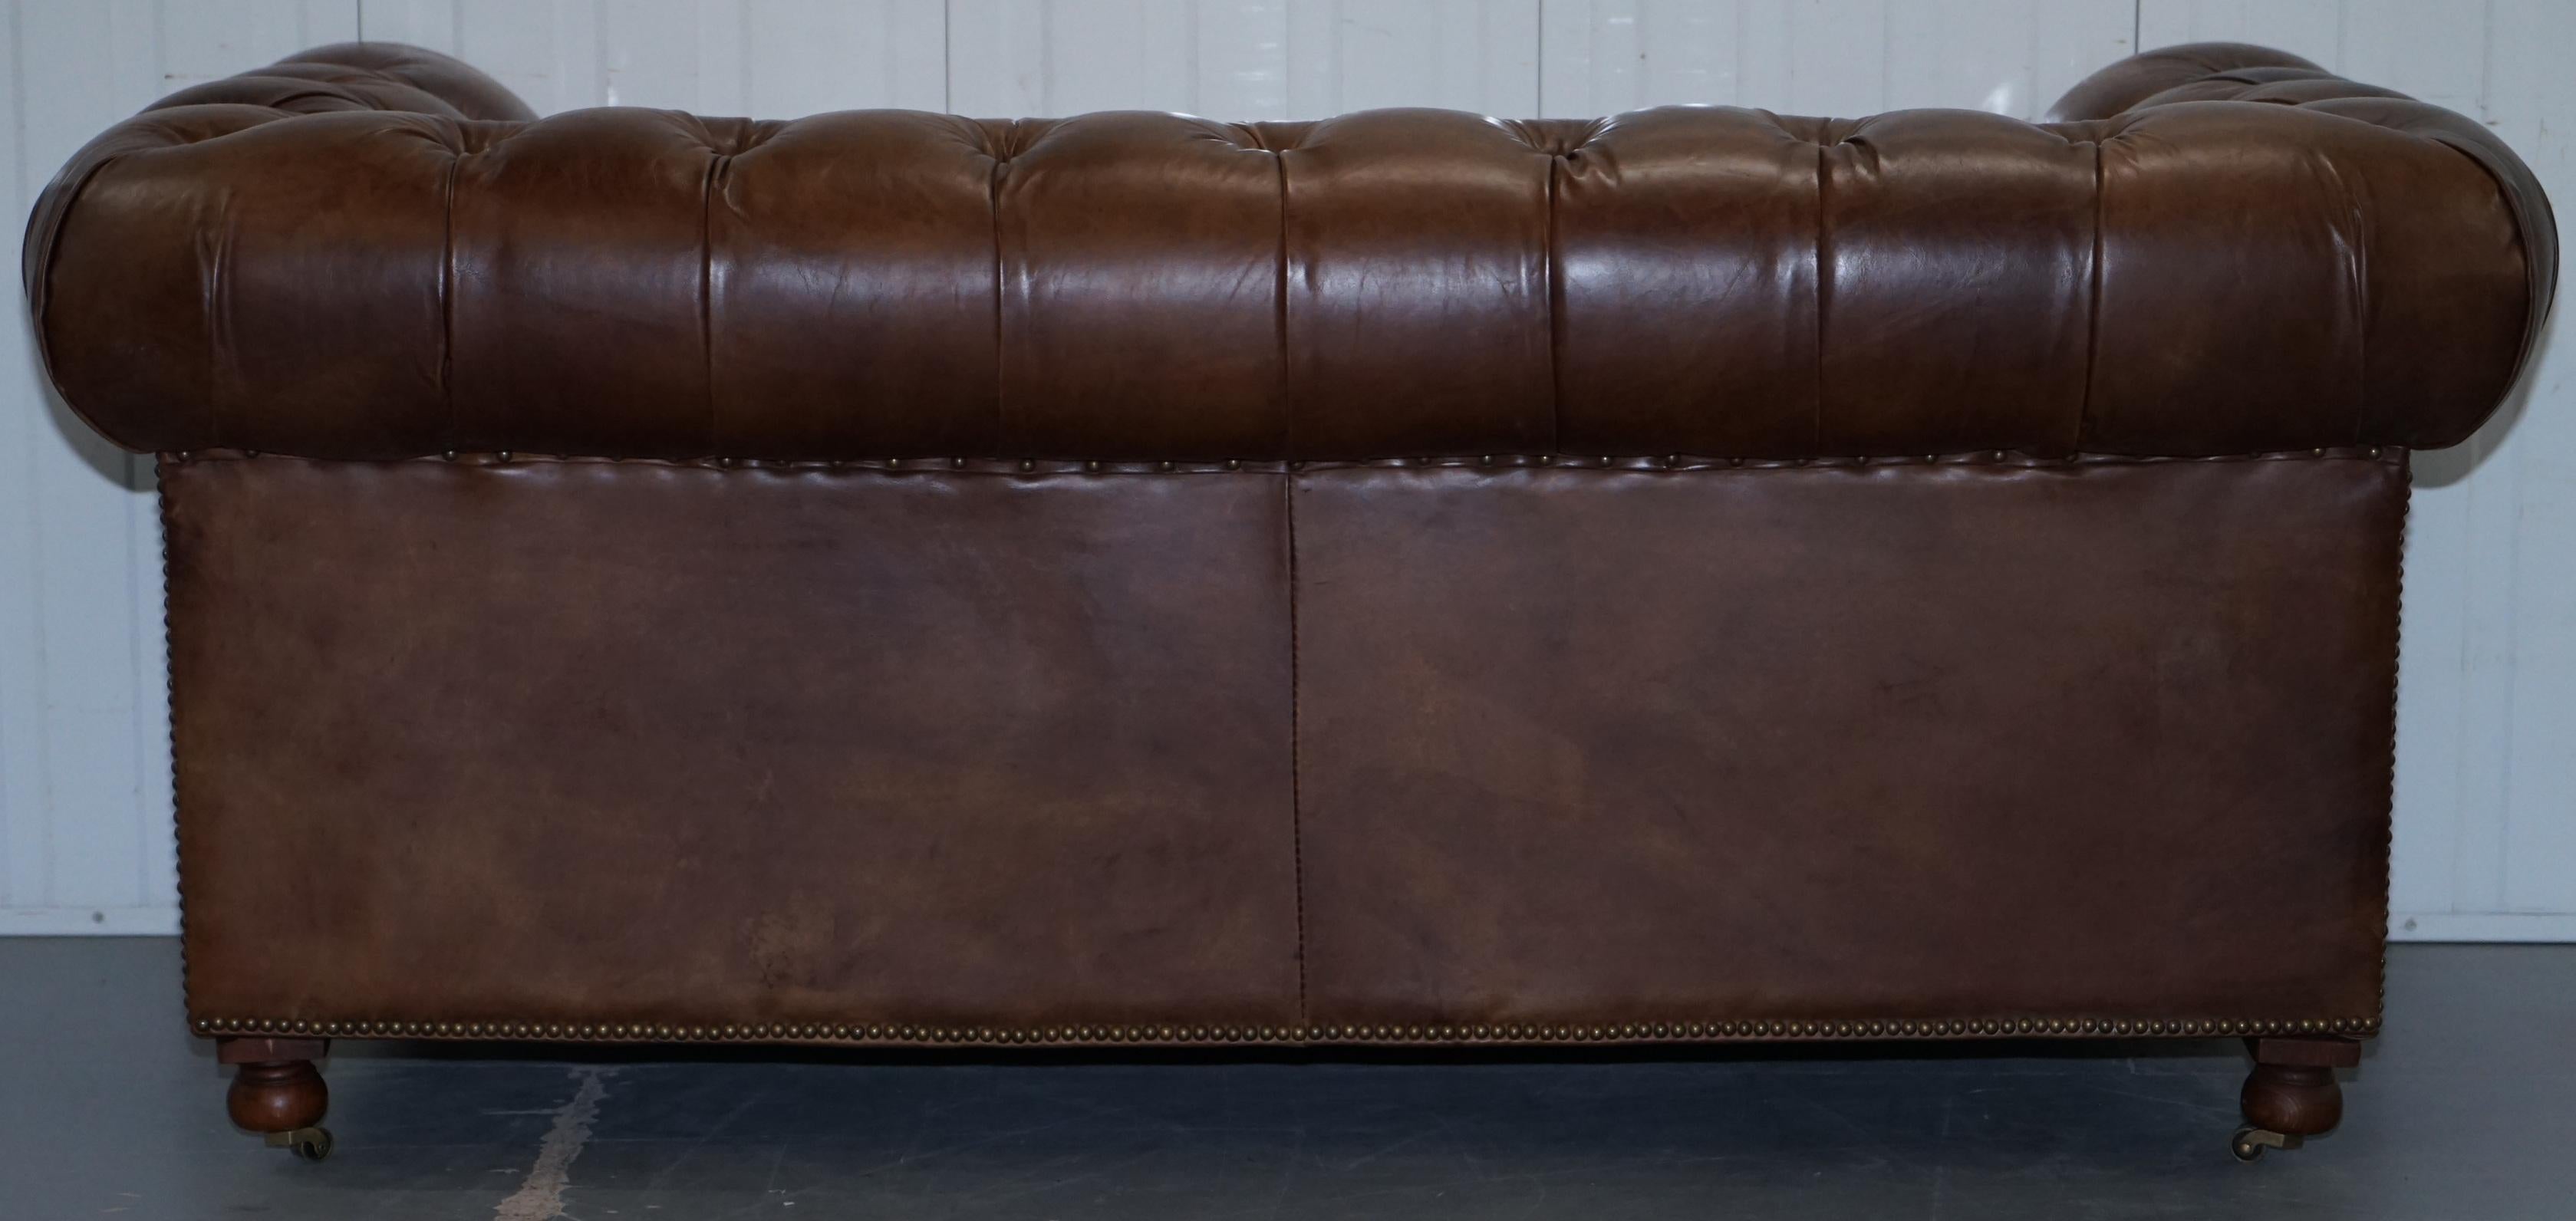 1 of 2 Timothy Oulton Halo Westminster Brown Leather Chesterfield Sofas 10